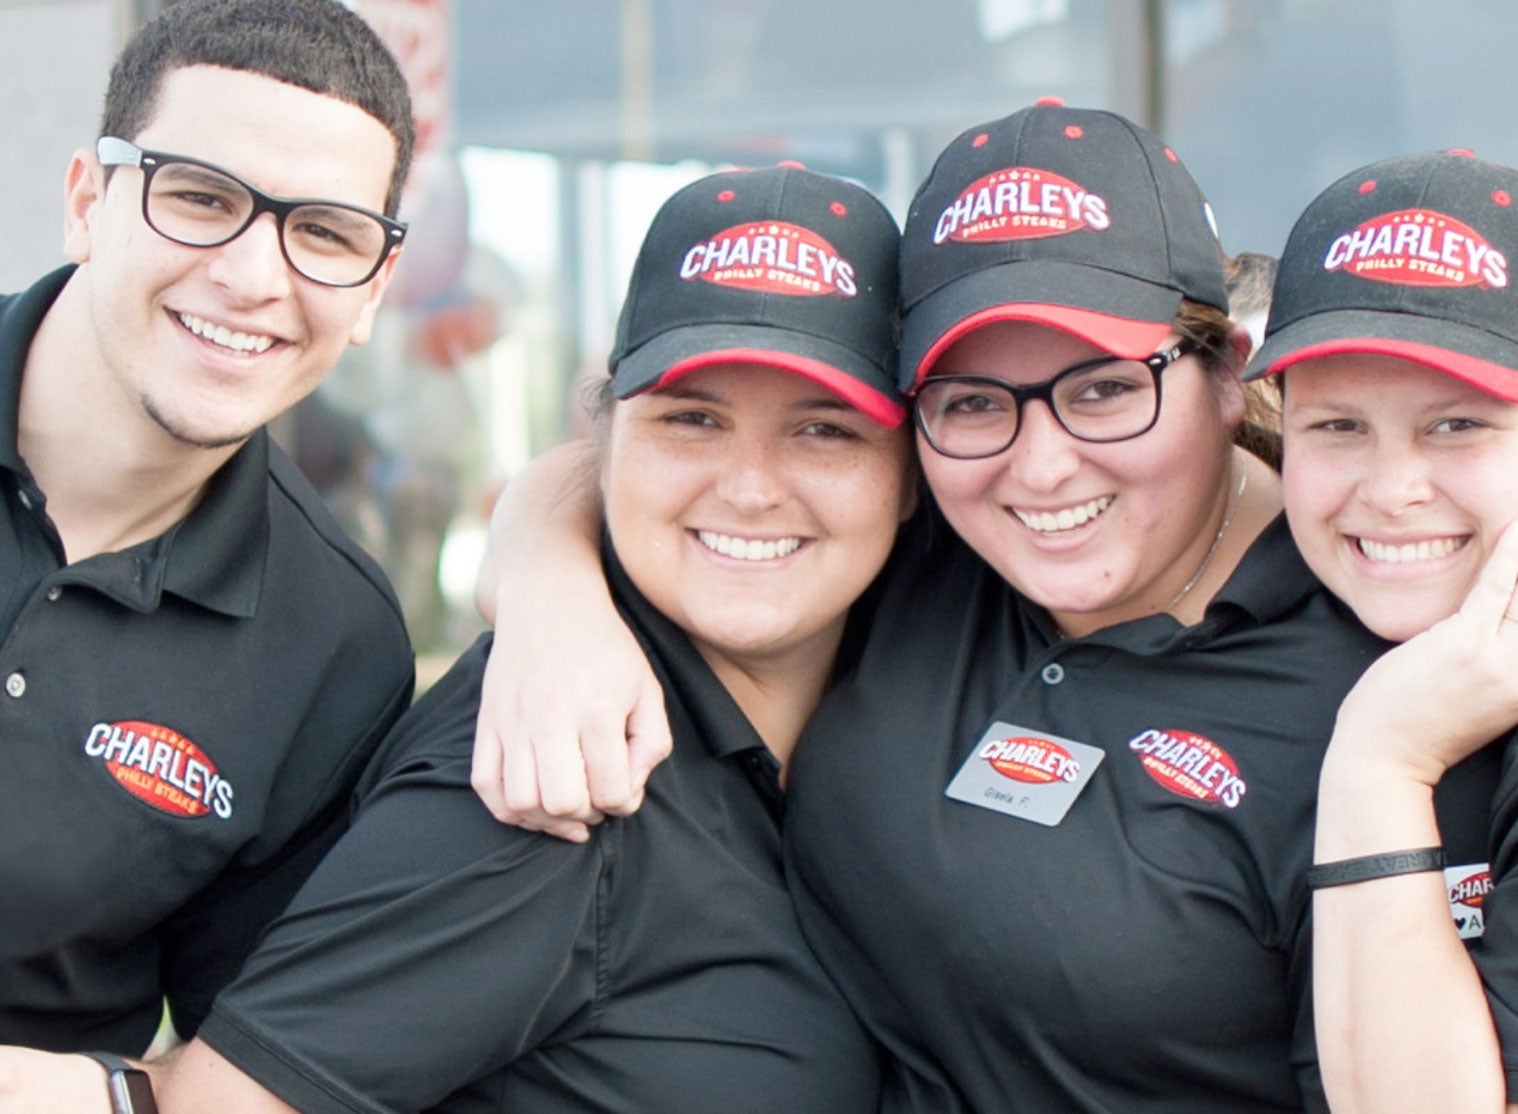 Four Charleys team members smiling and laughing while wearing uniforms. Learn more about Charleys careers. Work at Charleys.